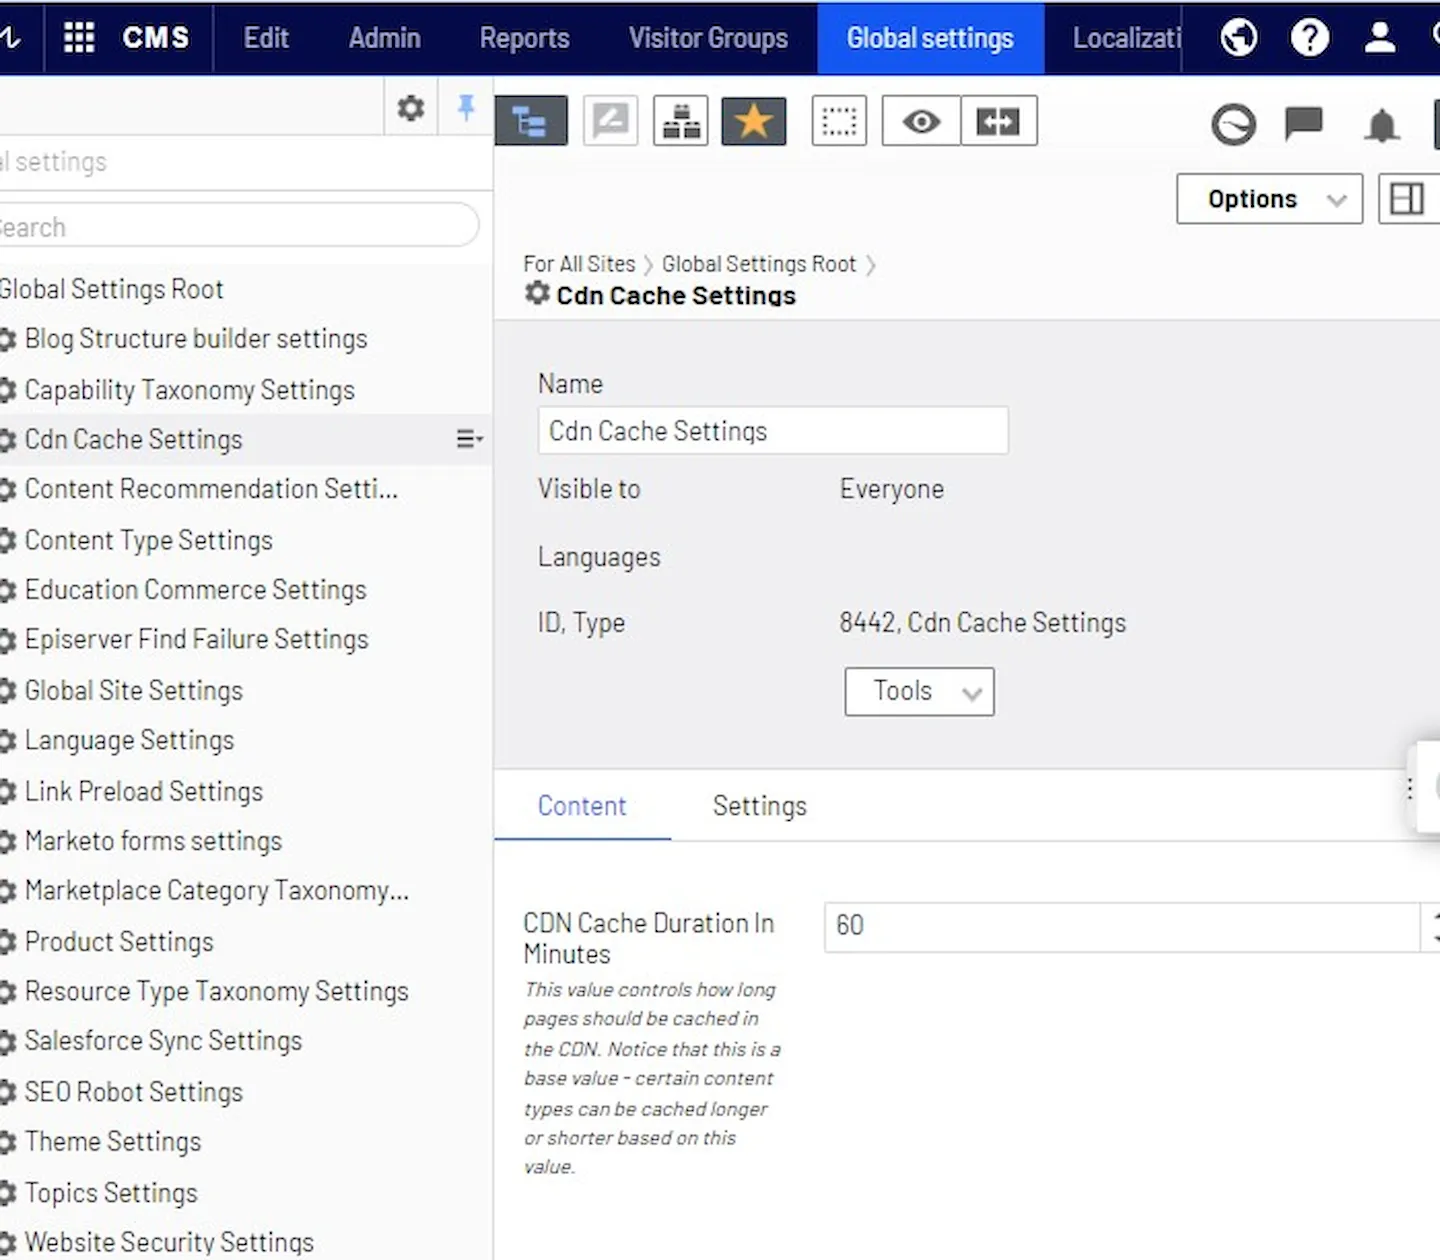 Screen shot showing the editorial interface for settings